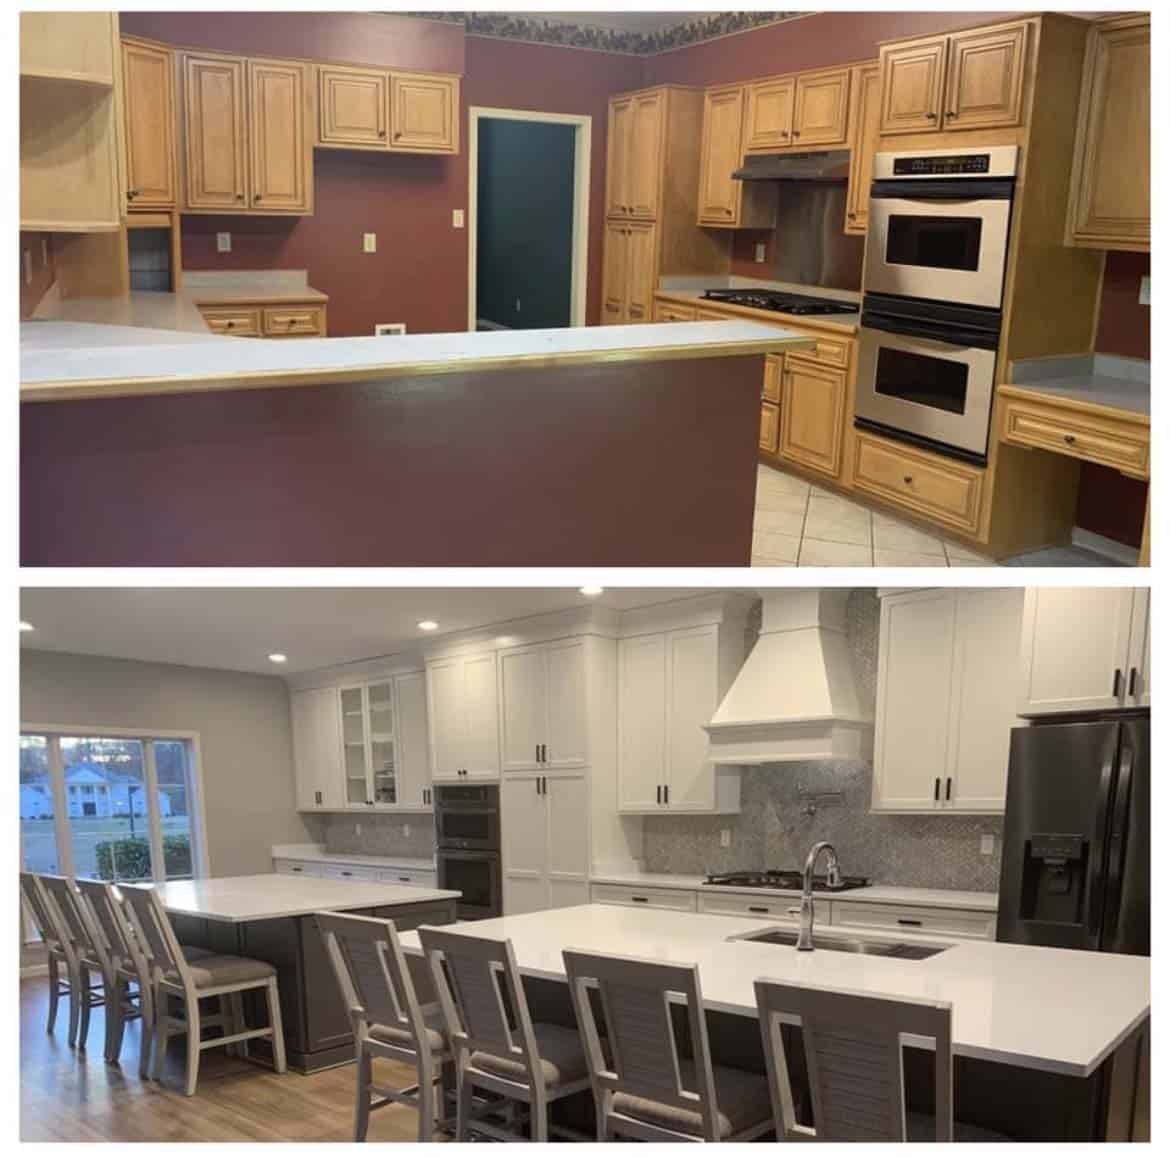 Sanders Construction- Before and After Kitchen